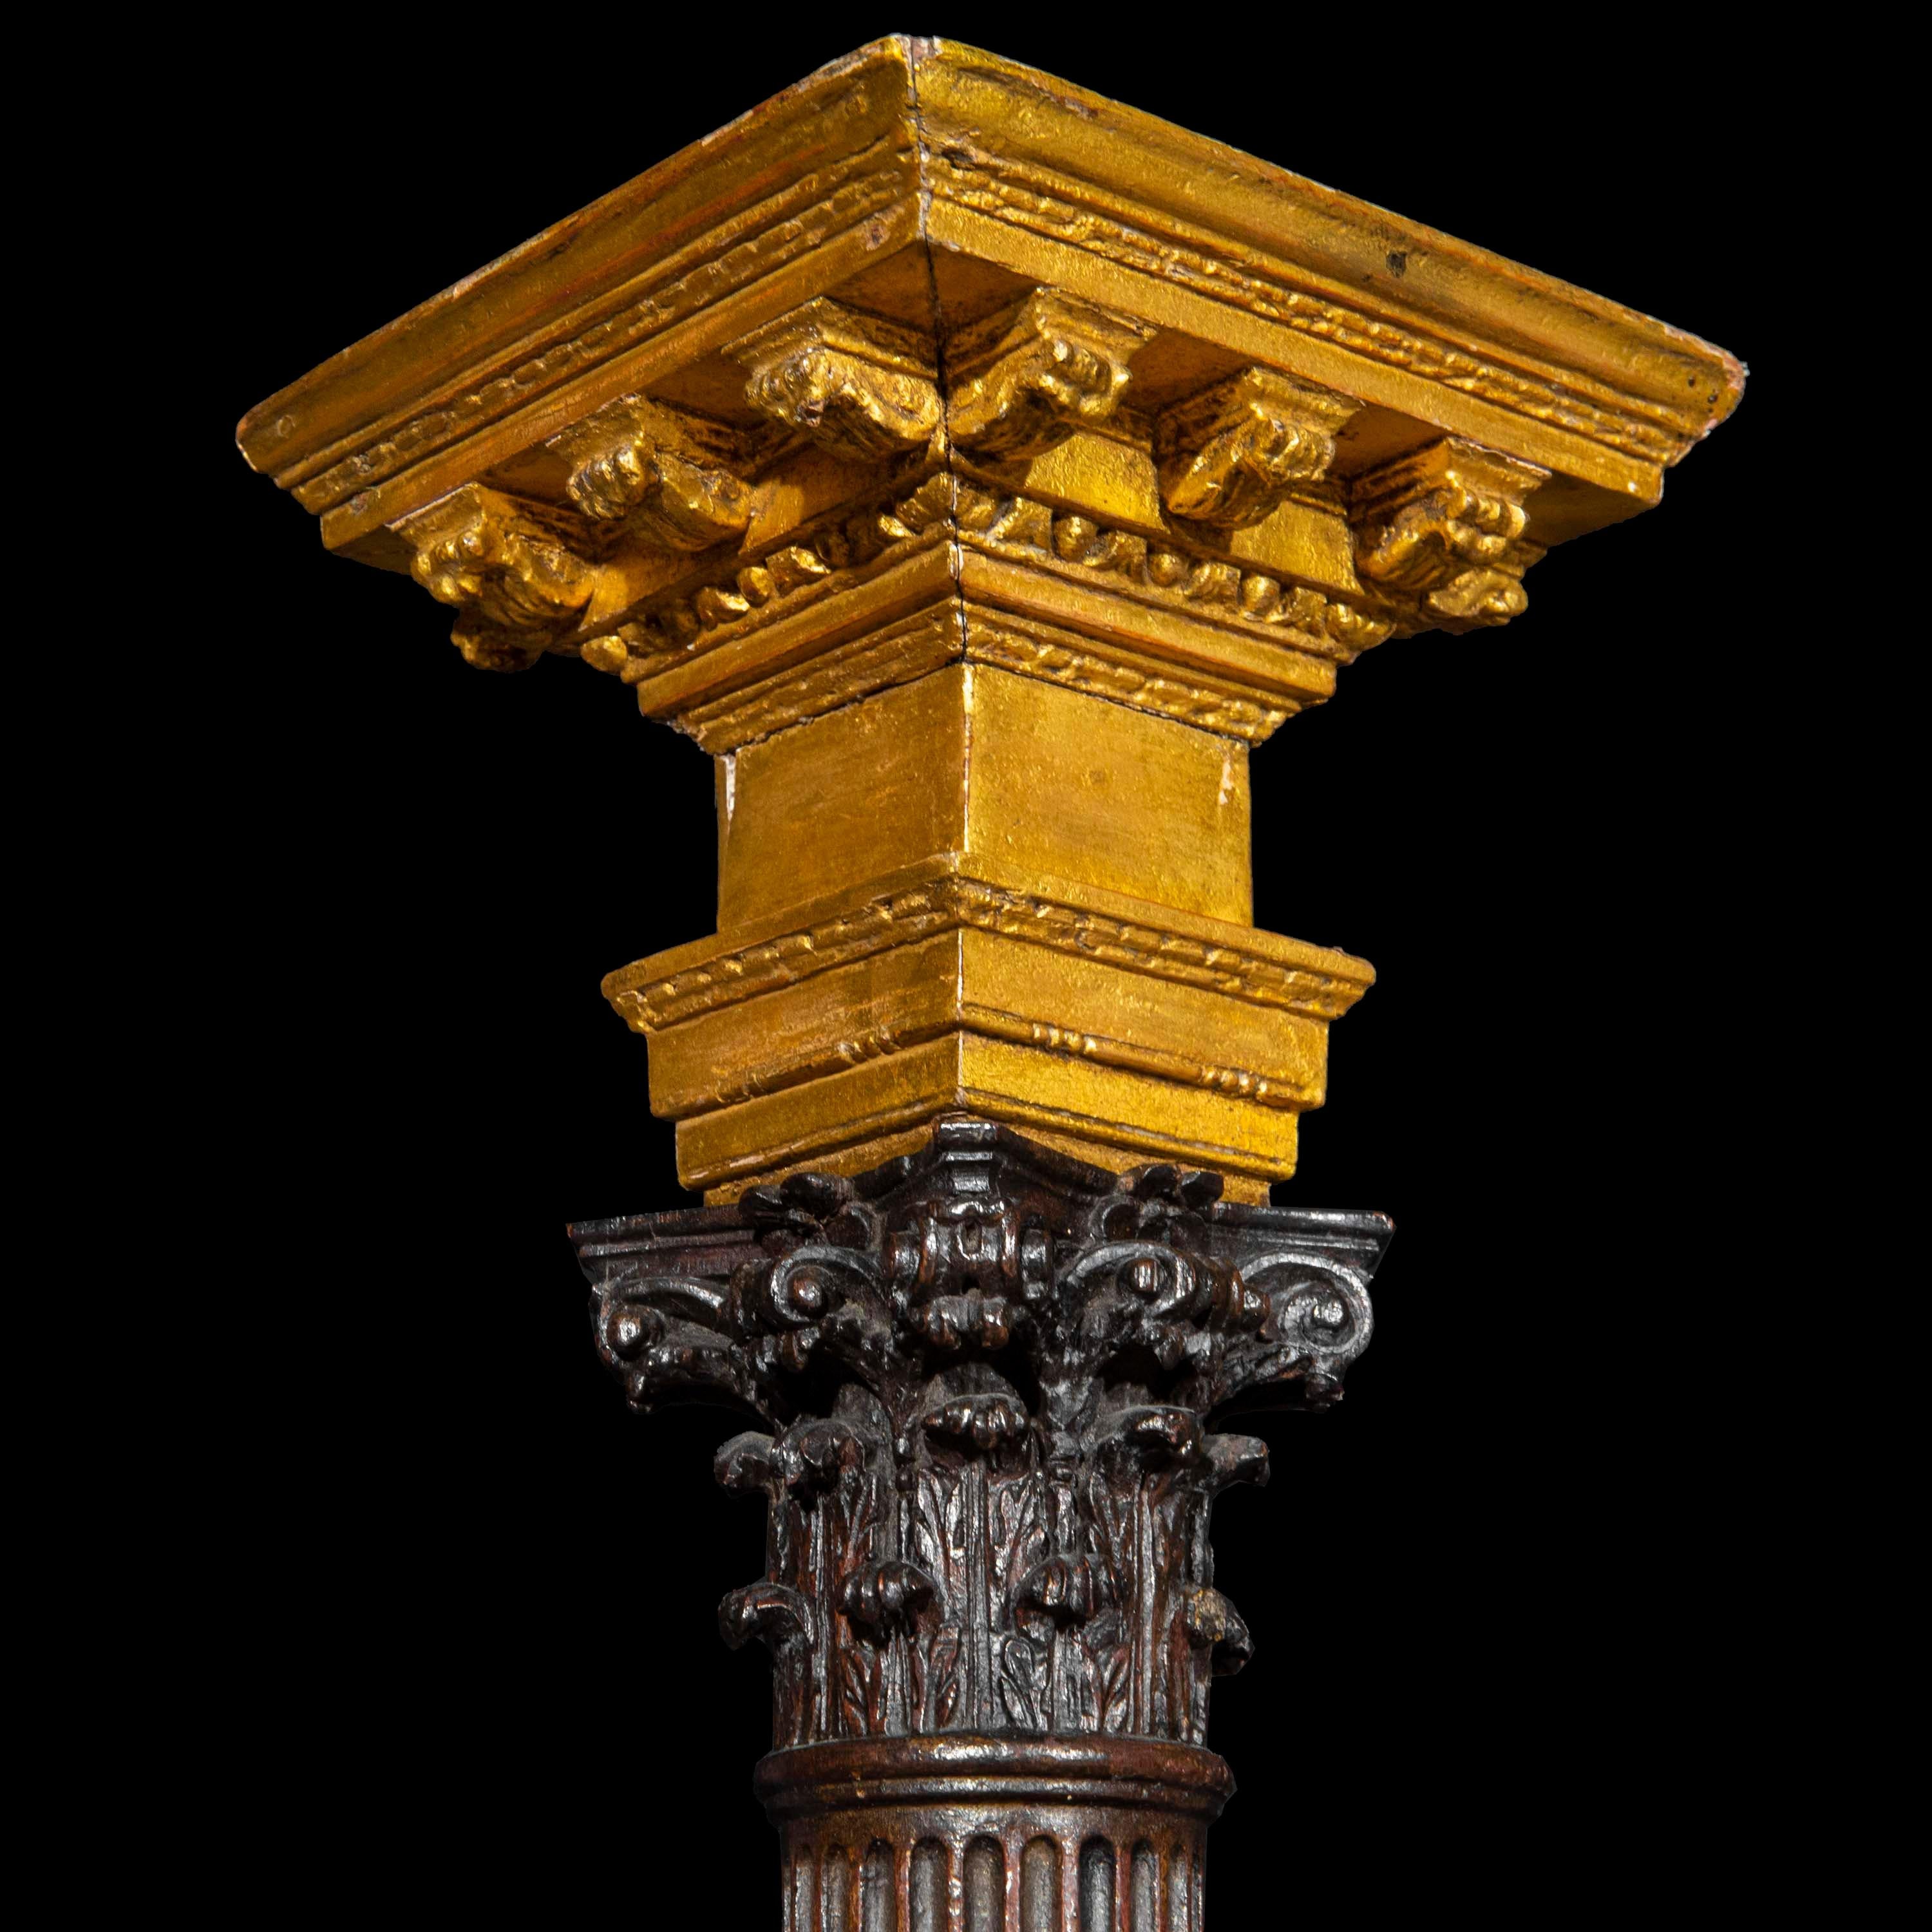 An extremely rare, exquisite Grand Tour-inspired architectural model of a Corinthian column
England, third quarter of 18th century.

Why we like it
Exquisitely carved and having accents picked out in gold, this extremely rare survival from the